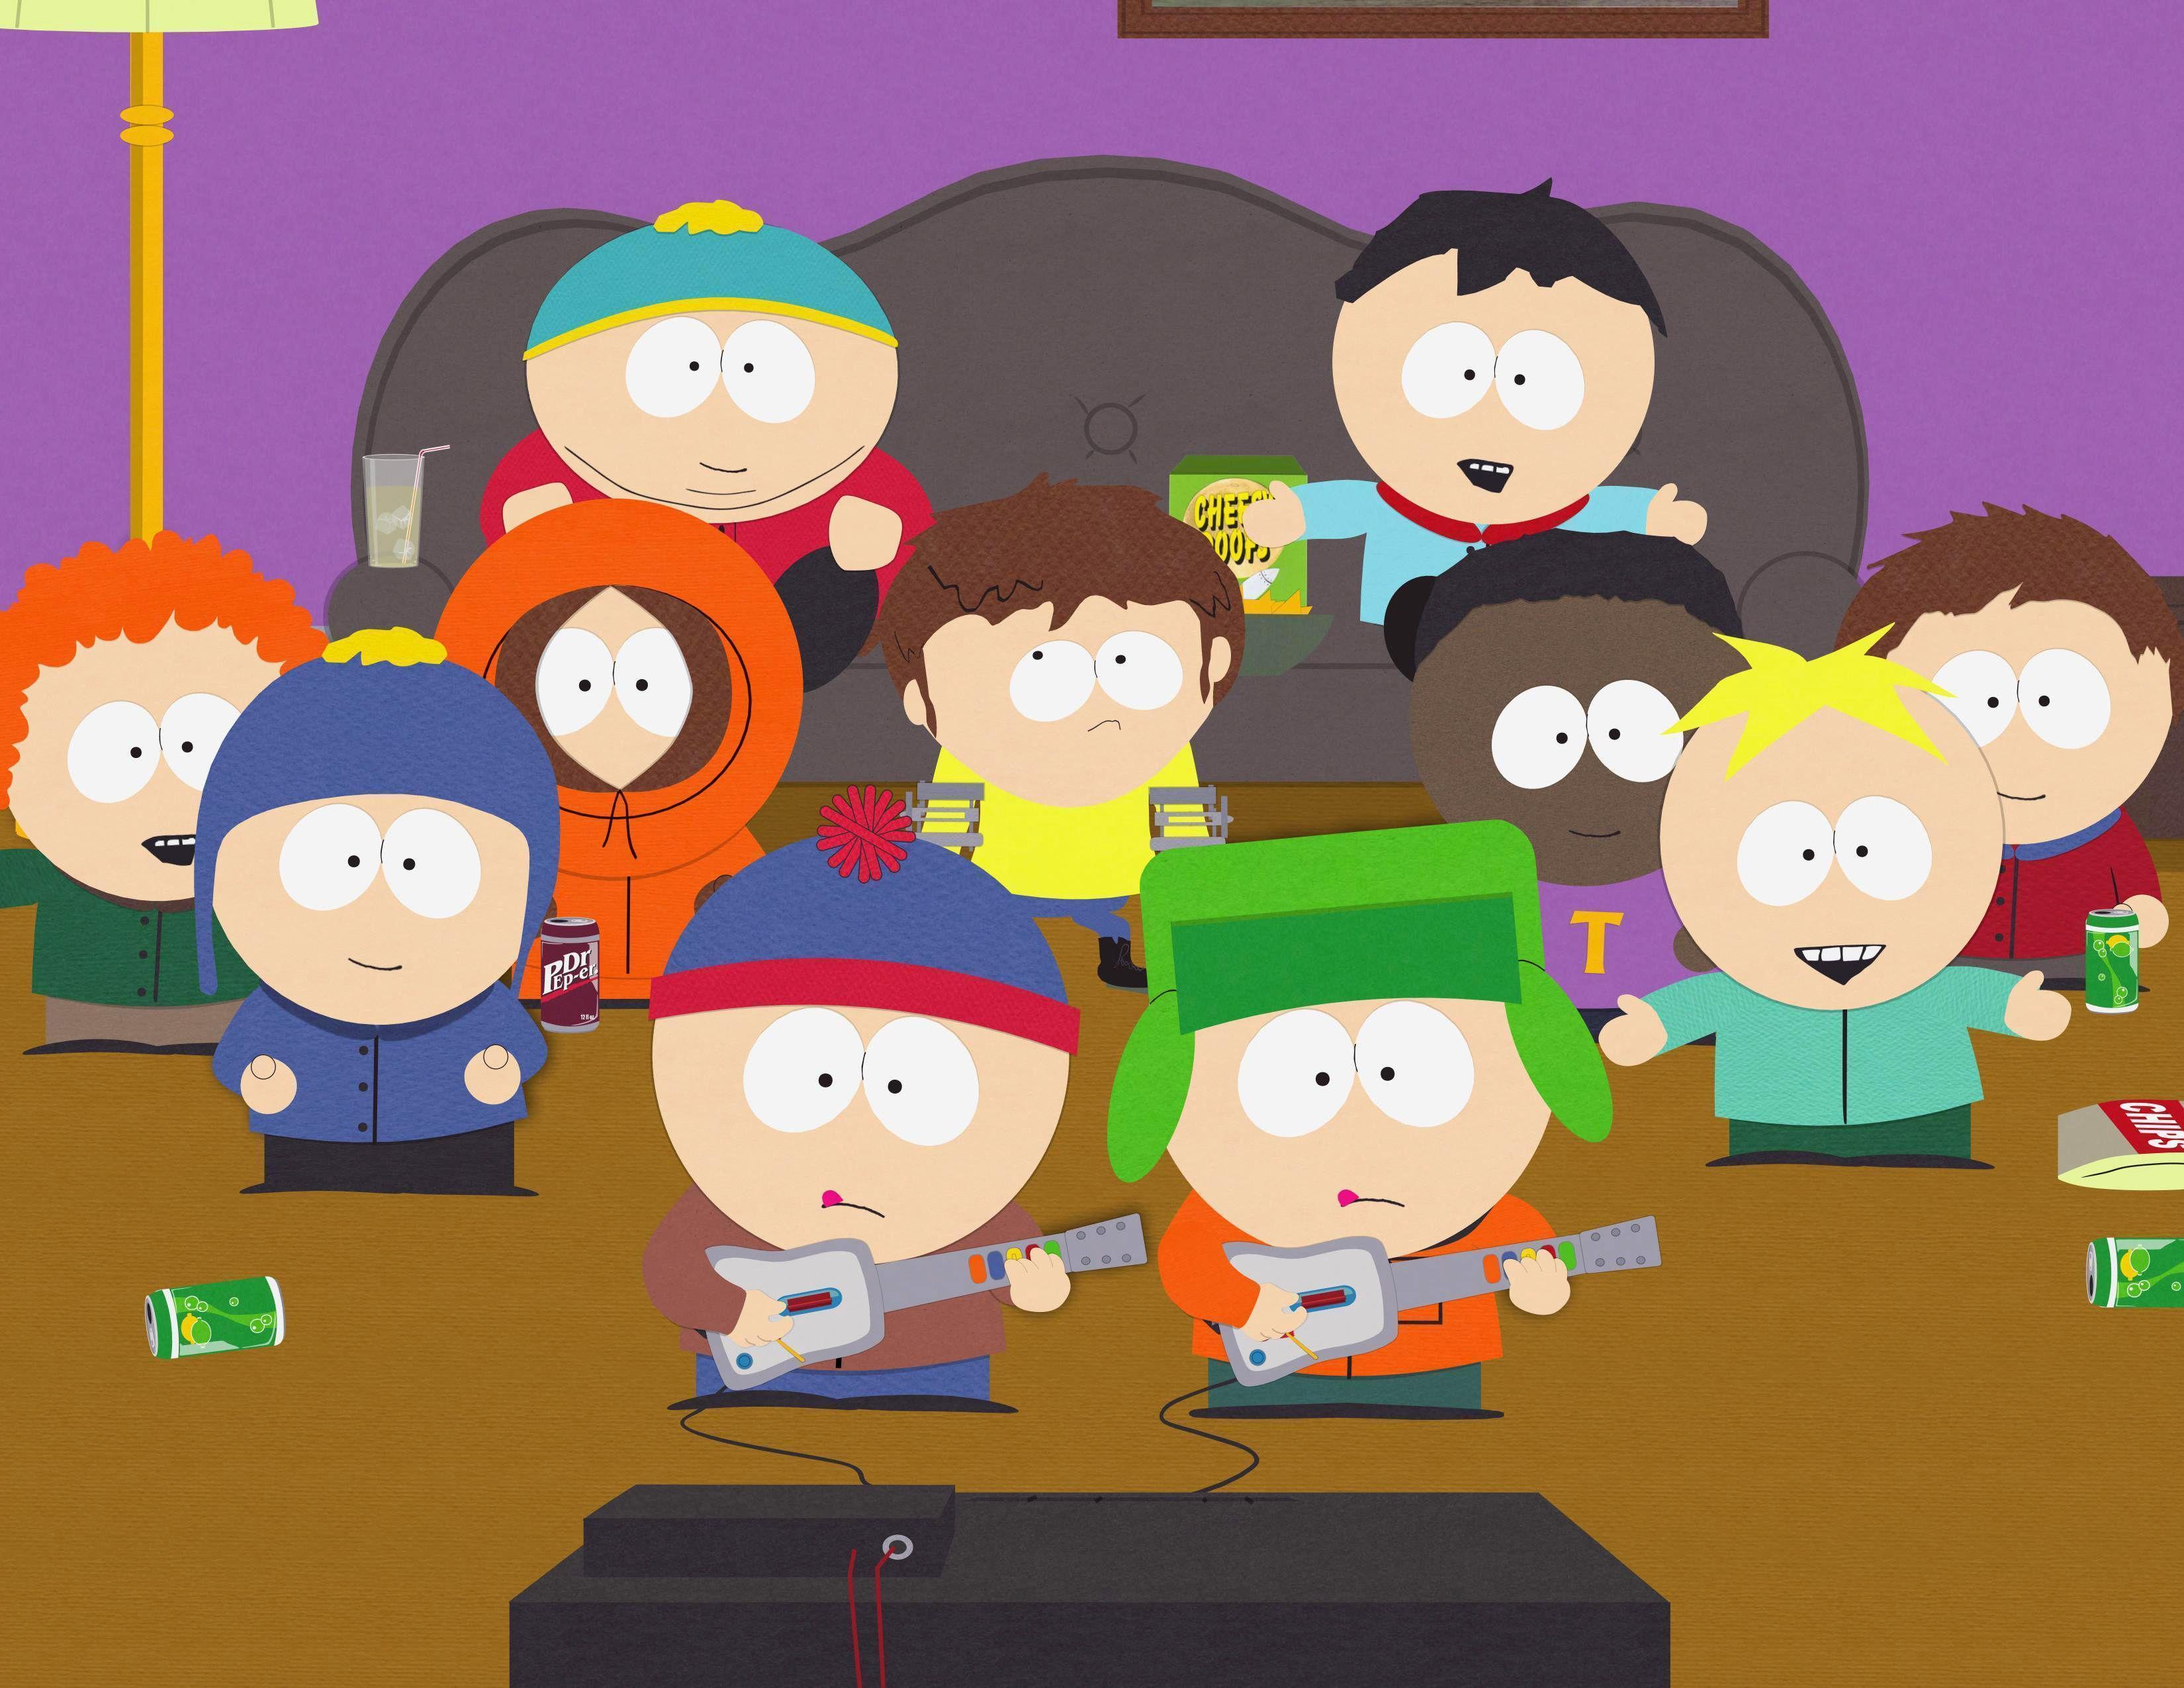 South Park HD Wallpaper and Background Image